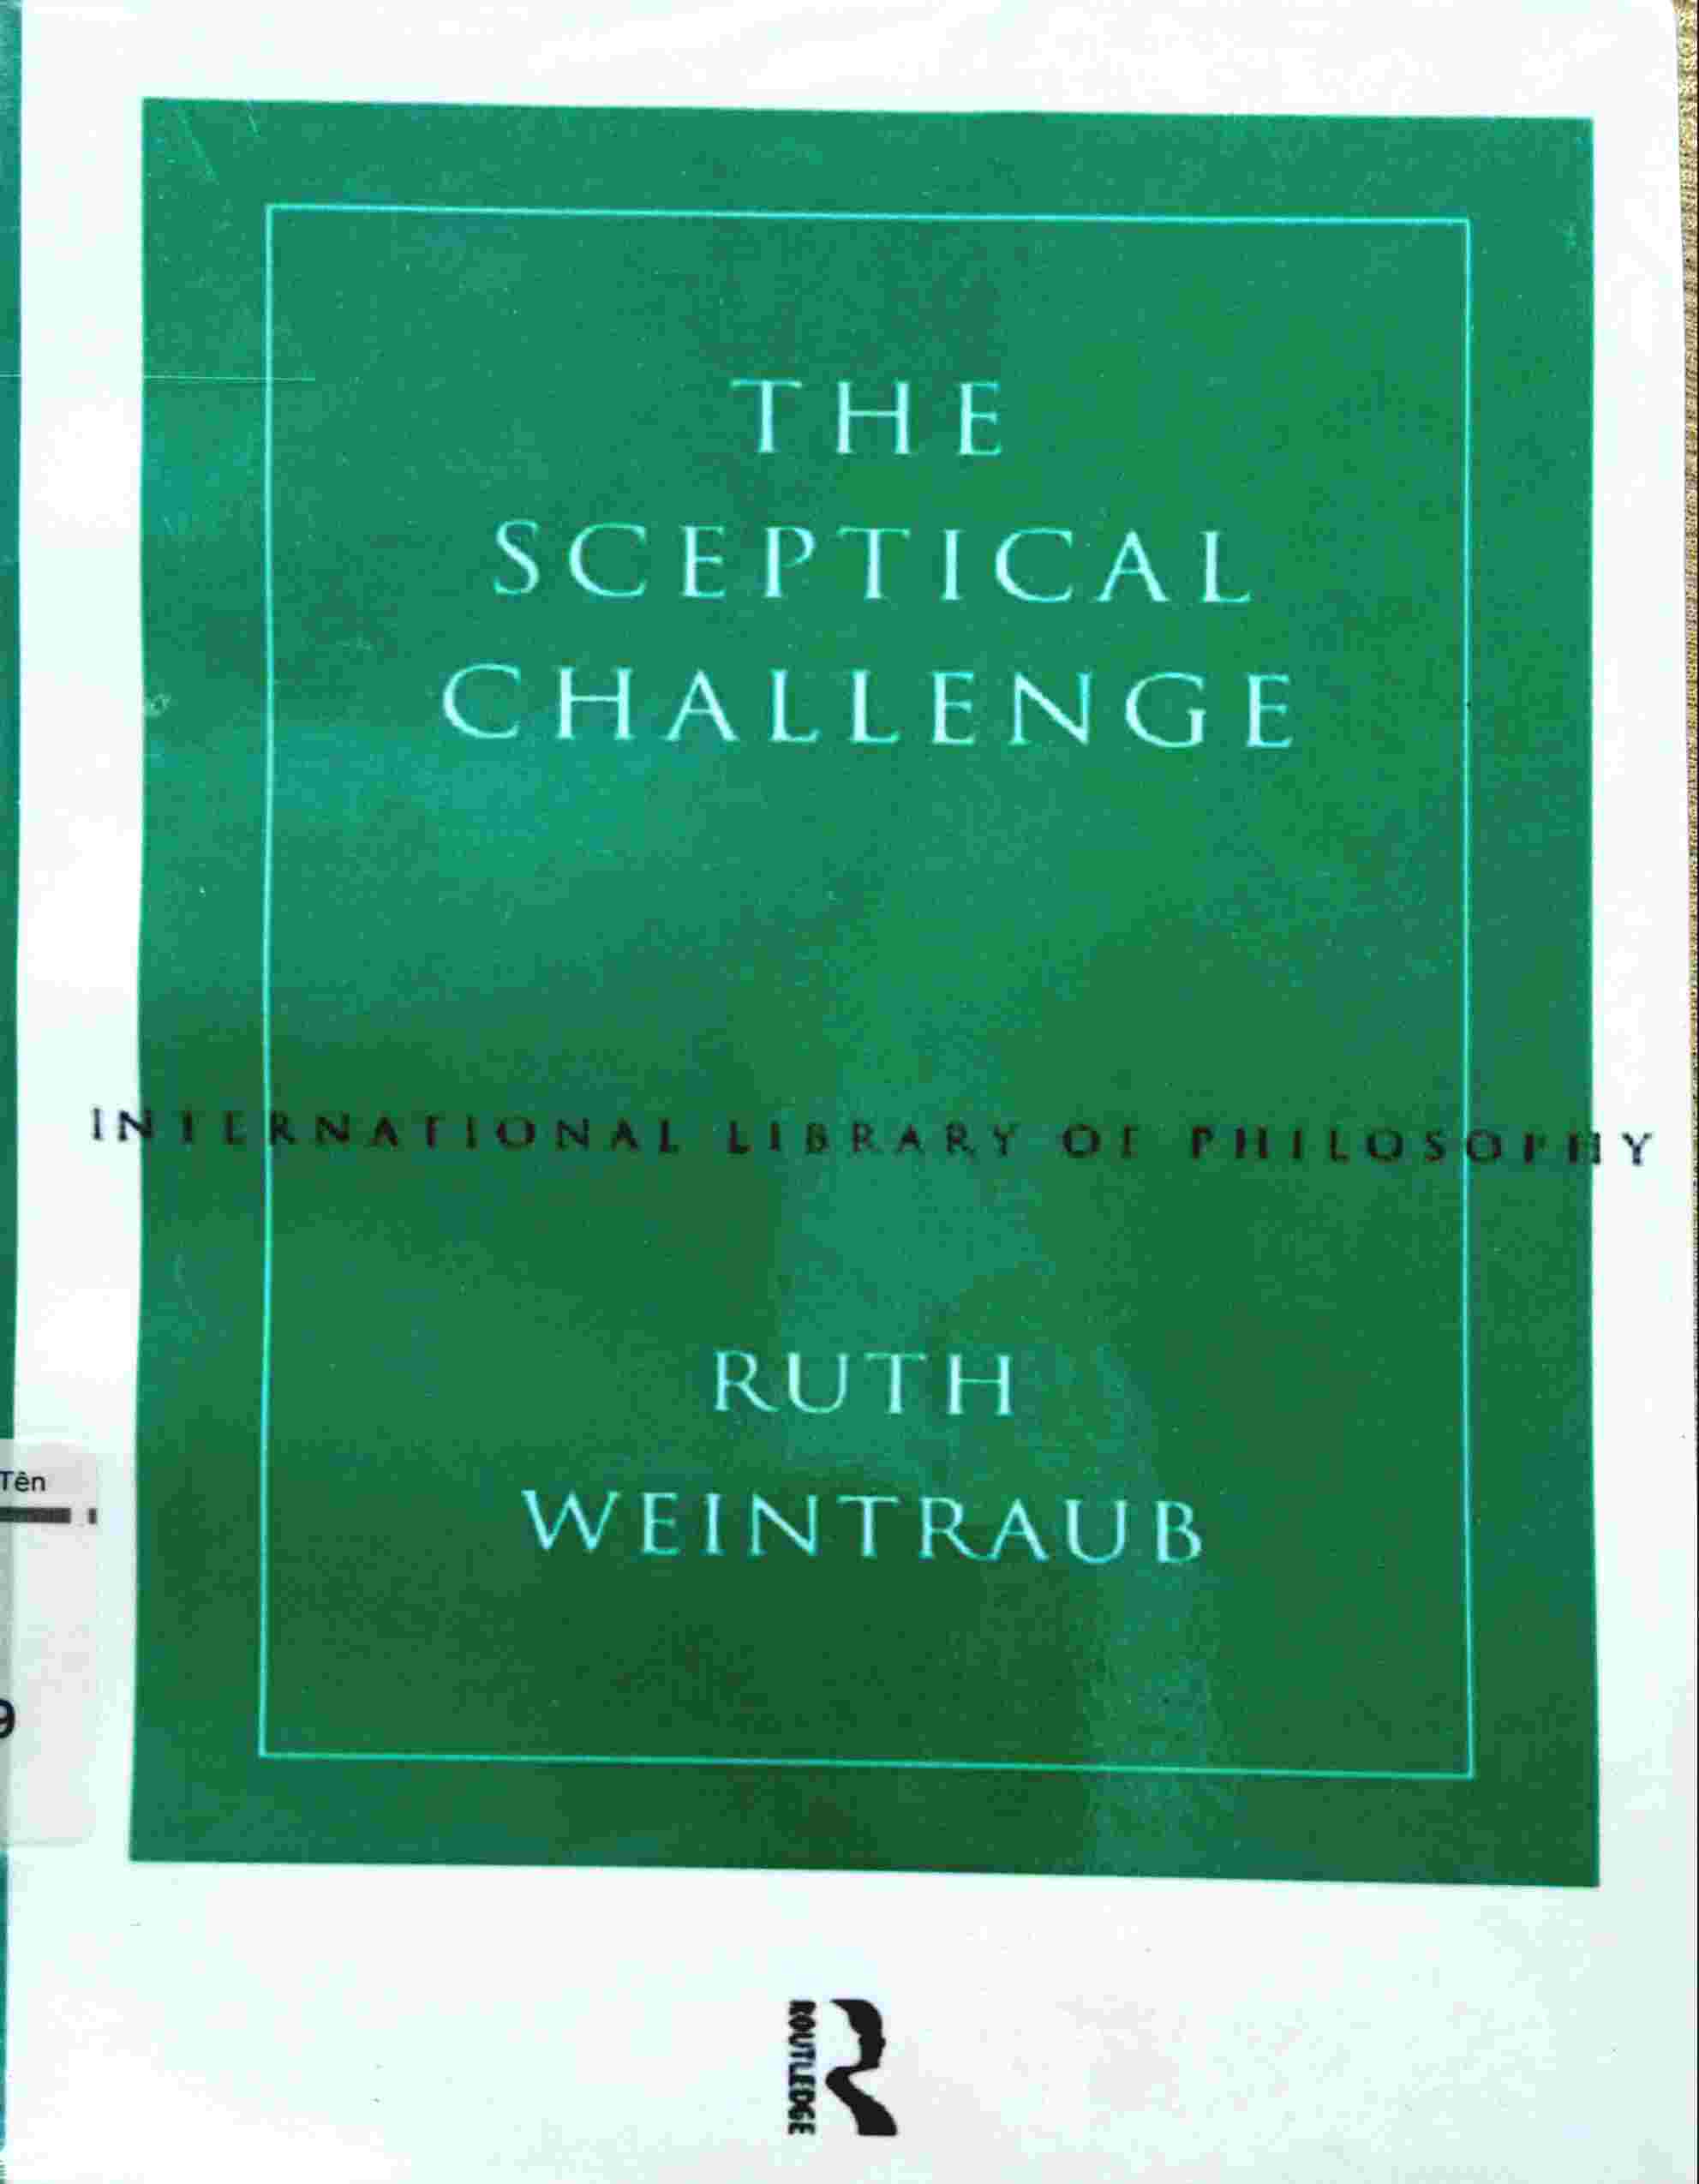 THE SCEPTICAL CHALLENGE